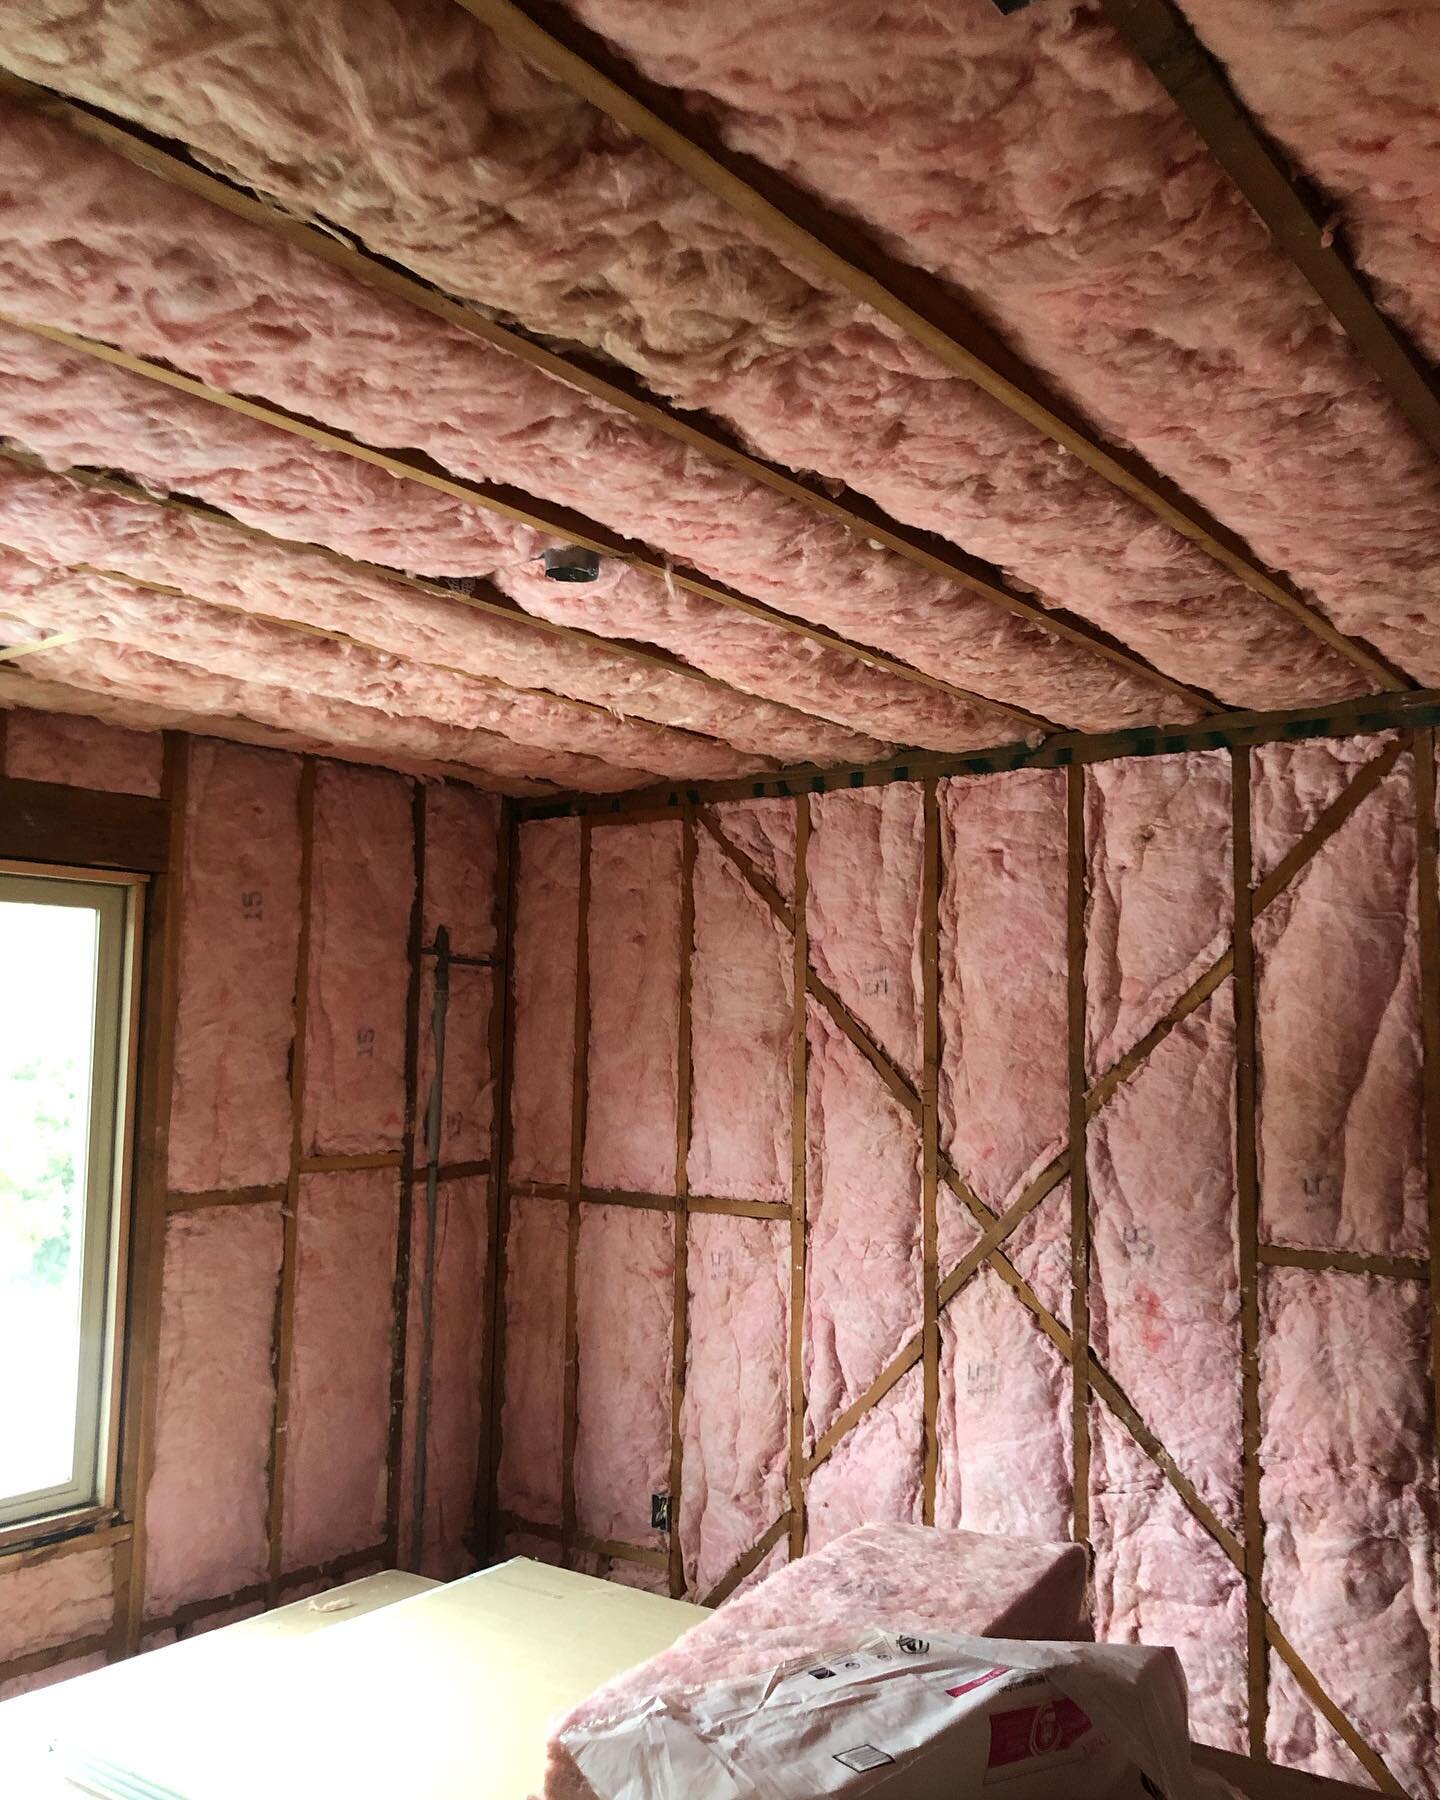 Moving along here on our Twin Peaks Project. Insulation done and ready for sheet rock.